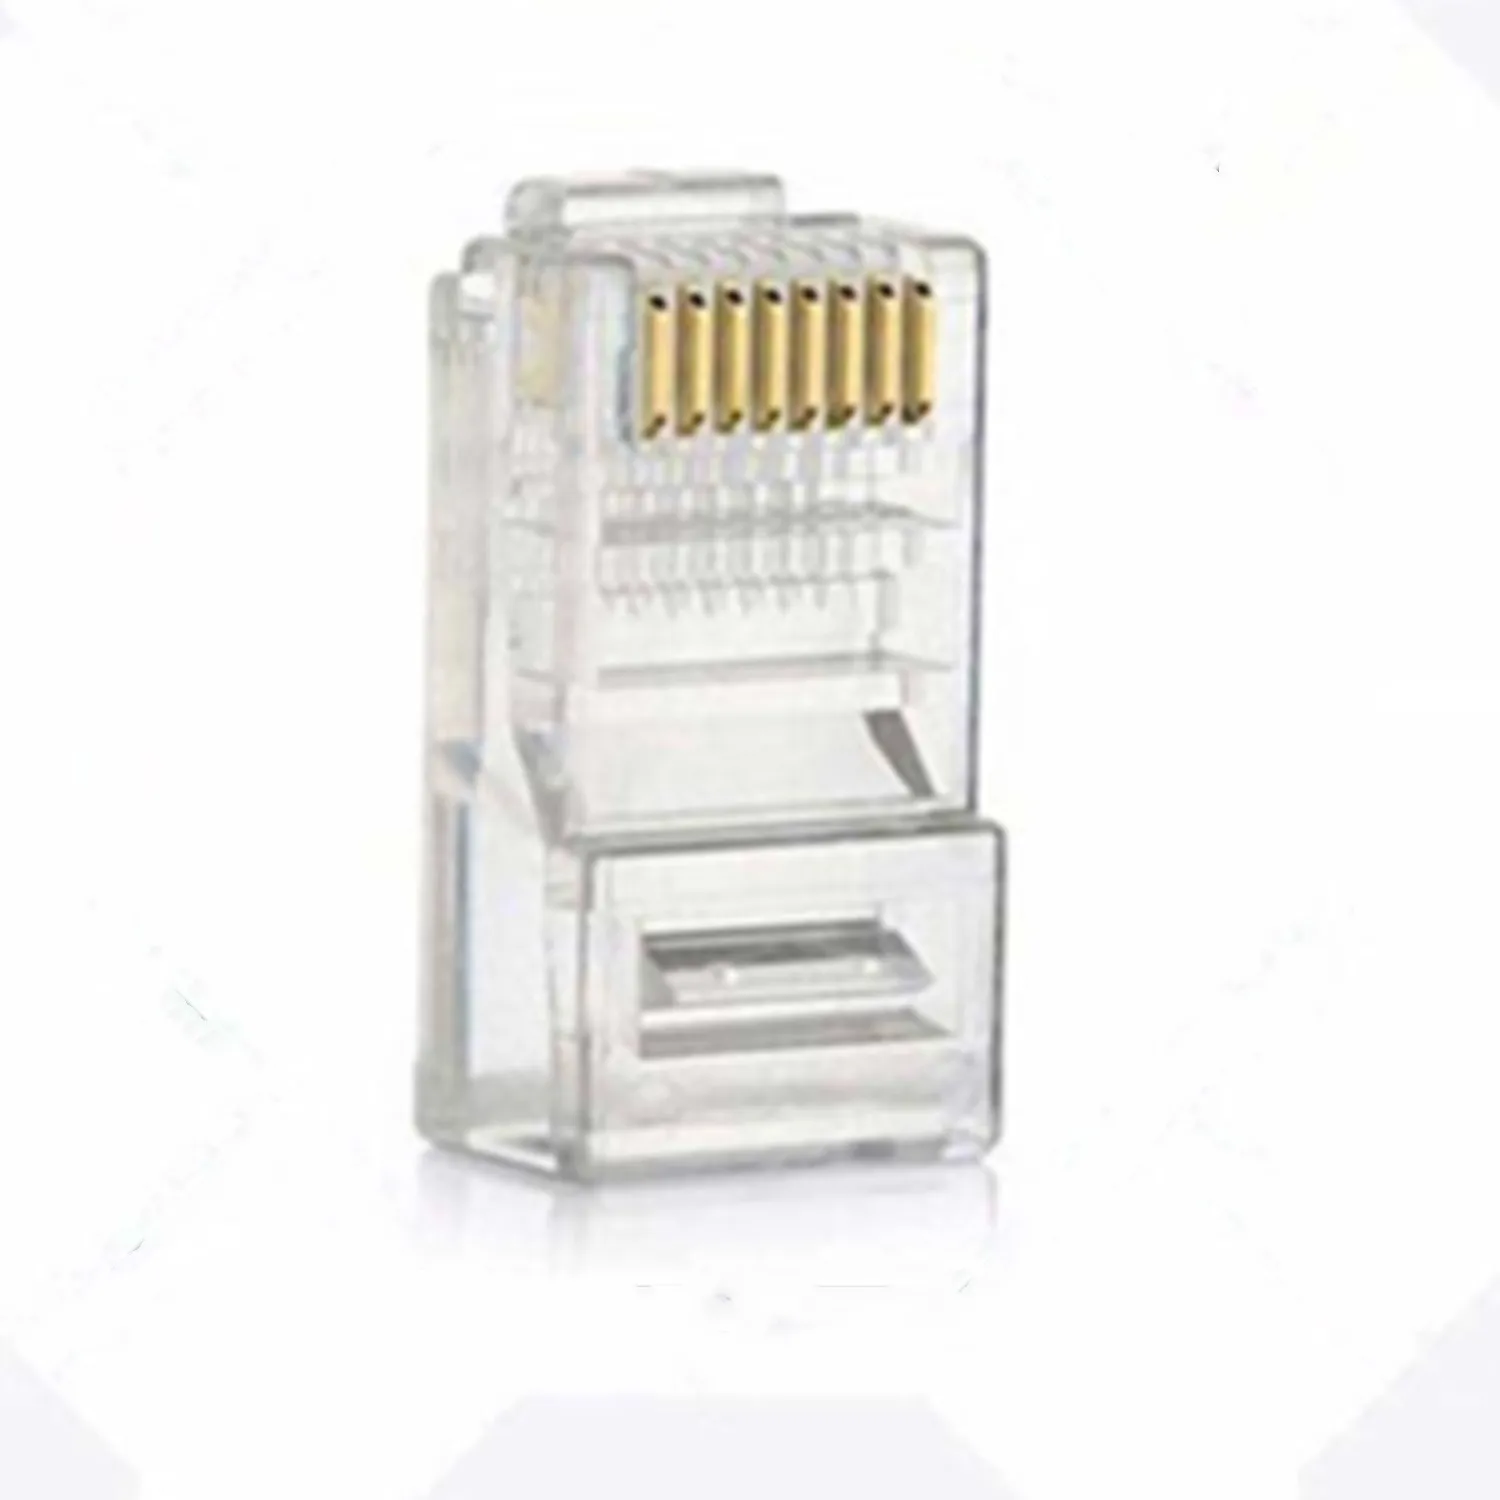 100PCS Crystal 8Pin CAT6 RJ45 Modular Plug Rj-45 Network Cable Connector Adapter Ethernet Cable Plugs Heads for CAT6 Cable